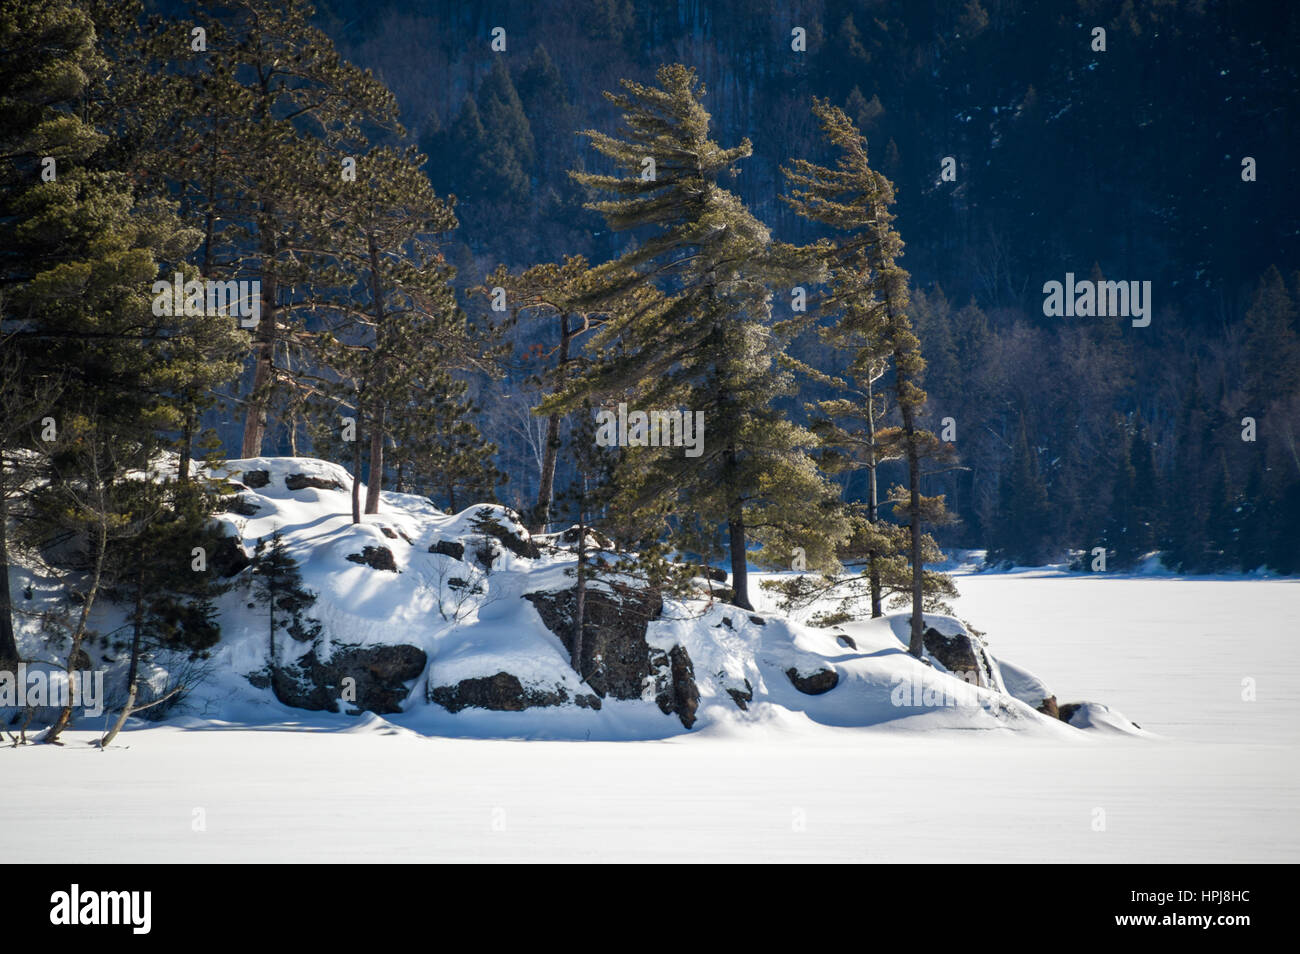 Snowy frozen lake with white pines background in Algonquin park, Ontario.  Snowy mountain behind. Stock Photo